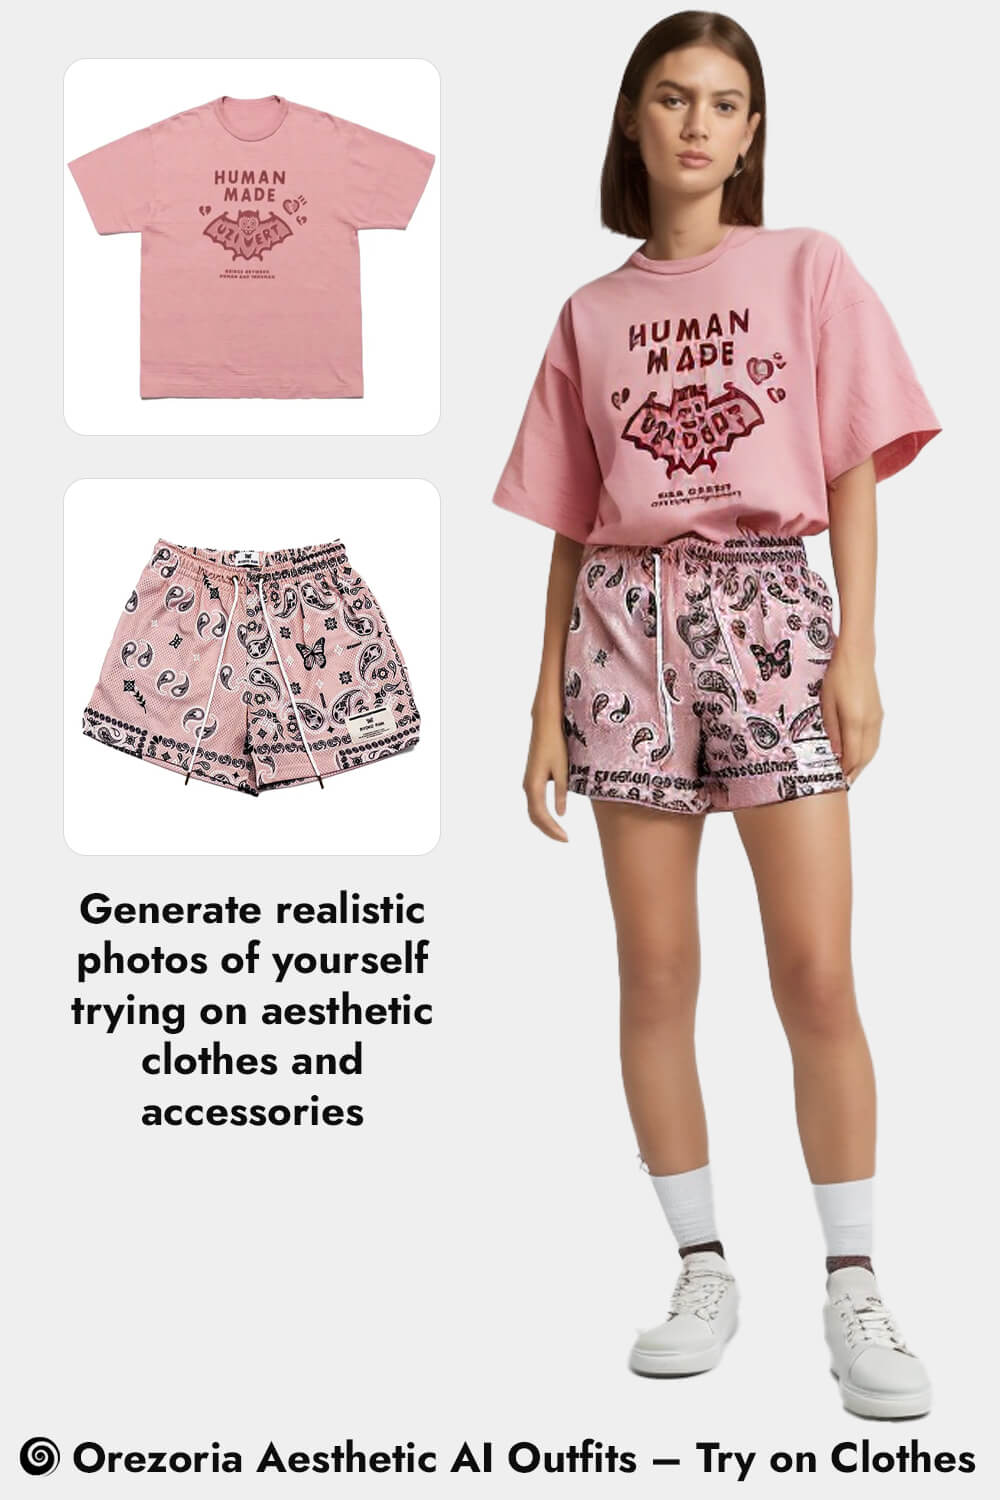 Orezoria Aesthetic AI Outfits – Try on Clothes Human Made x Lil Uzi Vert T Shirt Unisex Pink Indie Hip Hop Retro Hip Hop Paisley Pattern Basketball Shorts